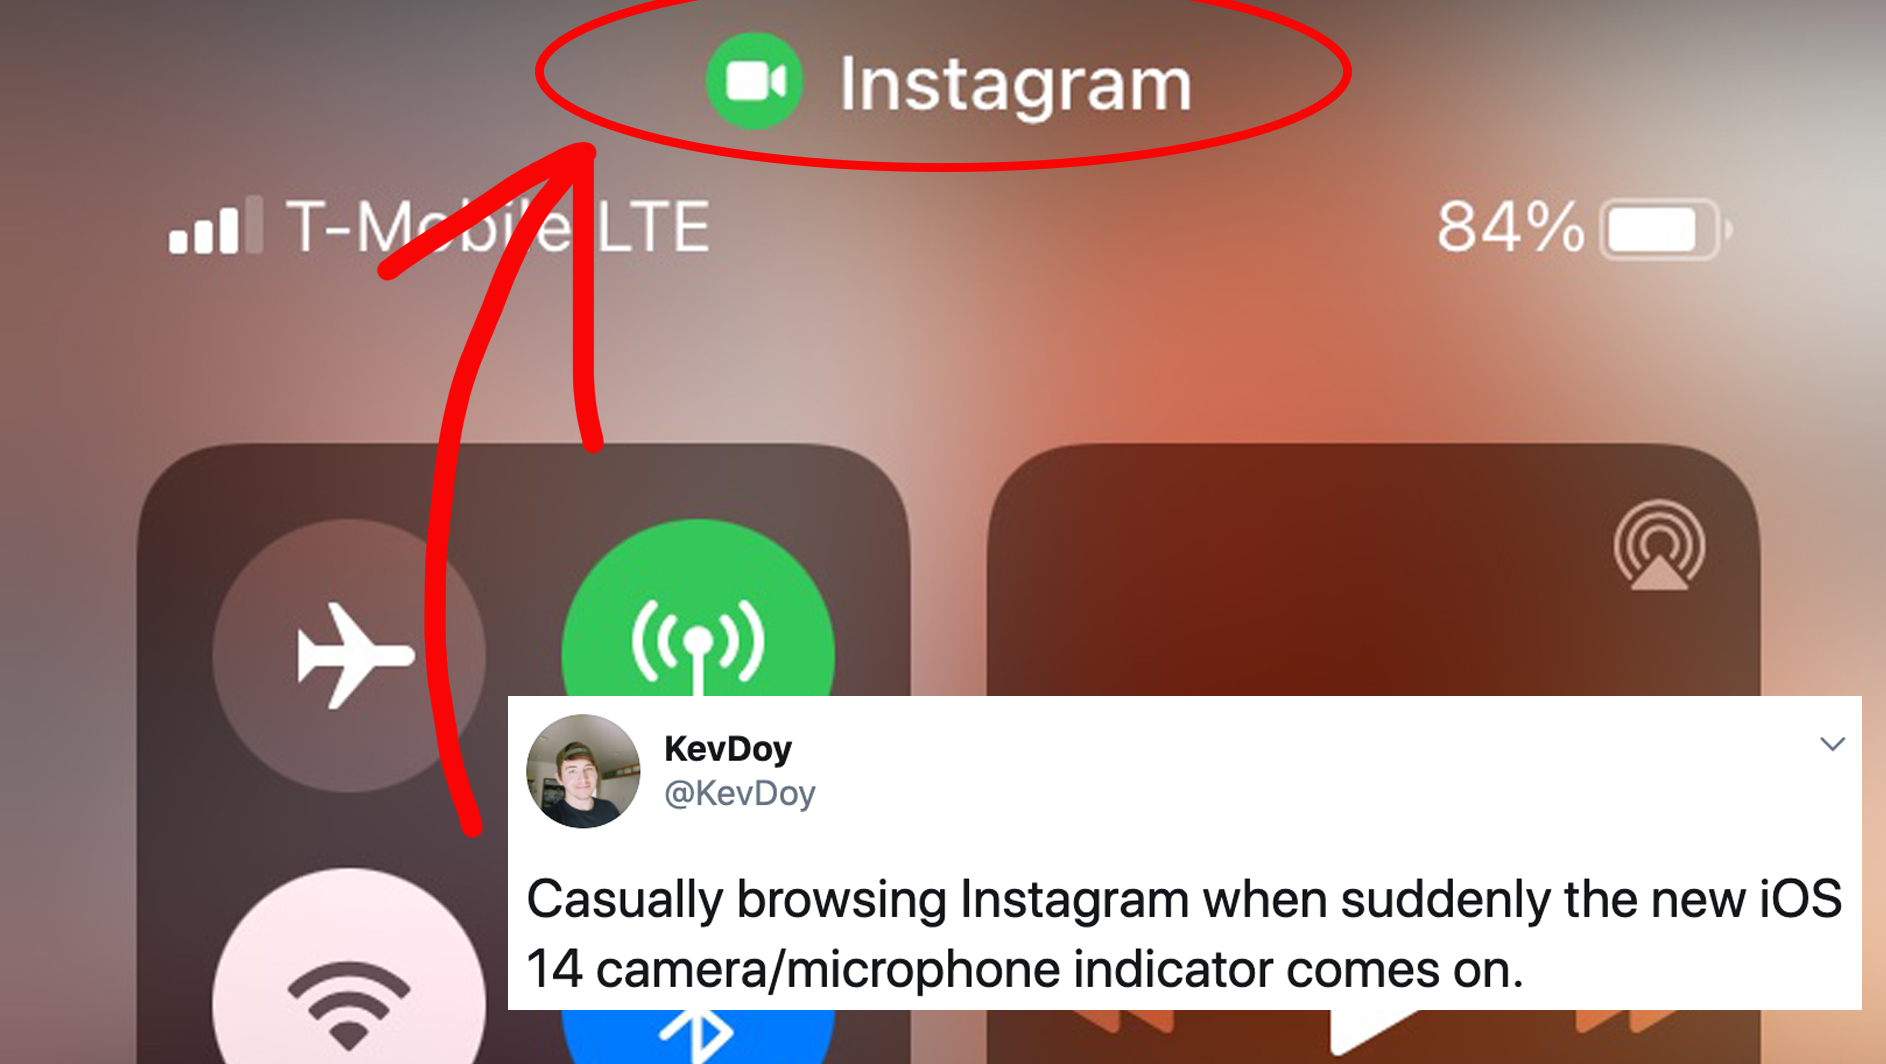 instagram accessing camera when not in use, bug shows instagram accessing camera, instagram camera notification, instagram camera activity notification, instagram bug shows camera activity, instagram bug shows camera access, instagram shows camera being accessed, instagram shows camera being accessed